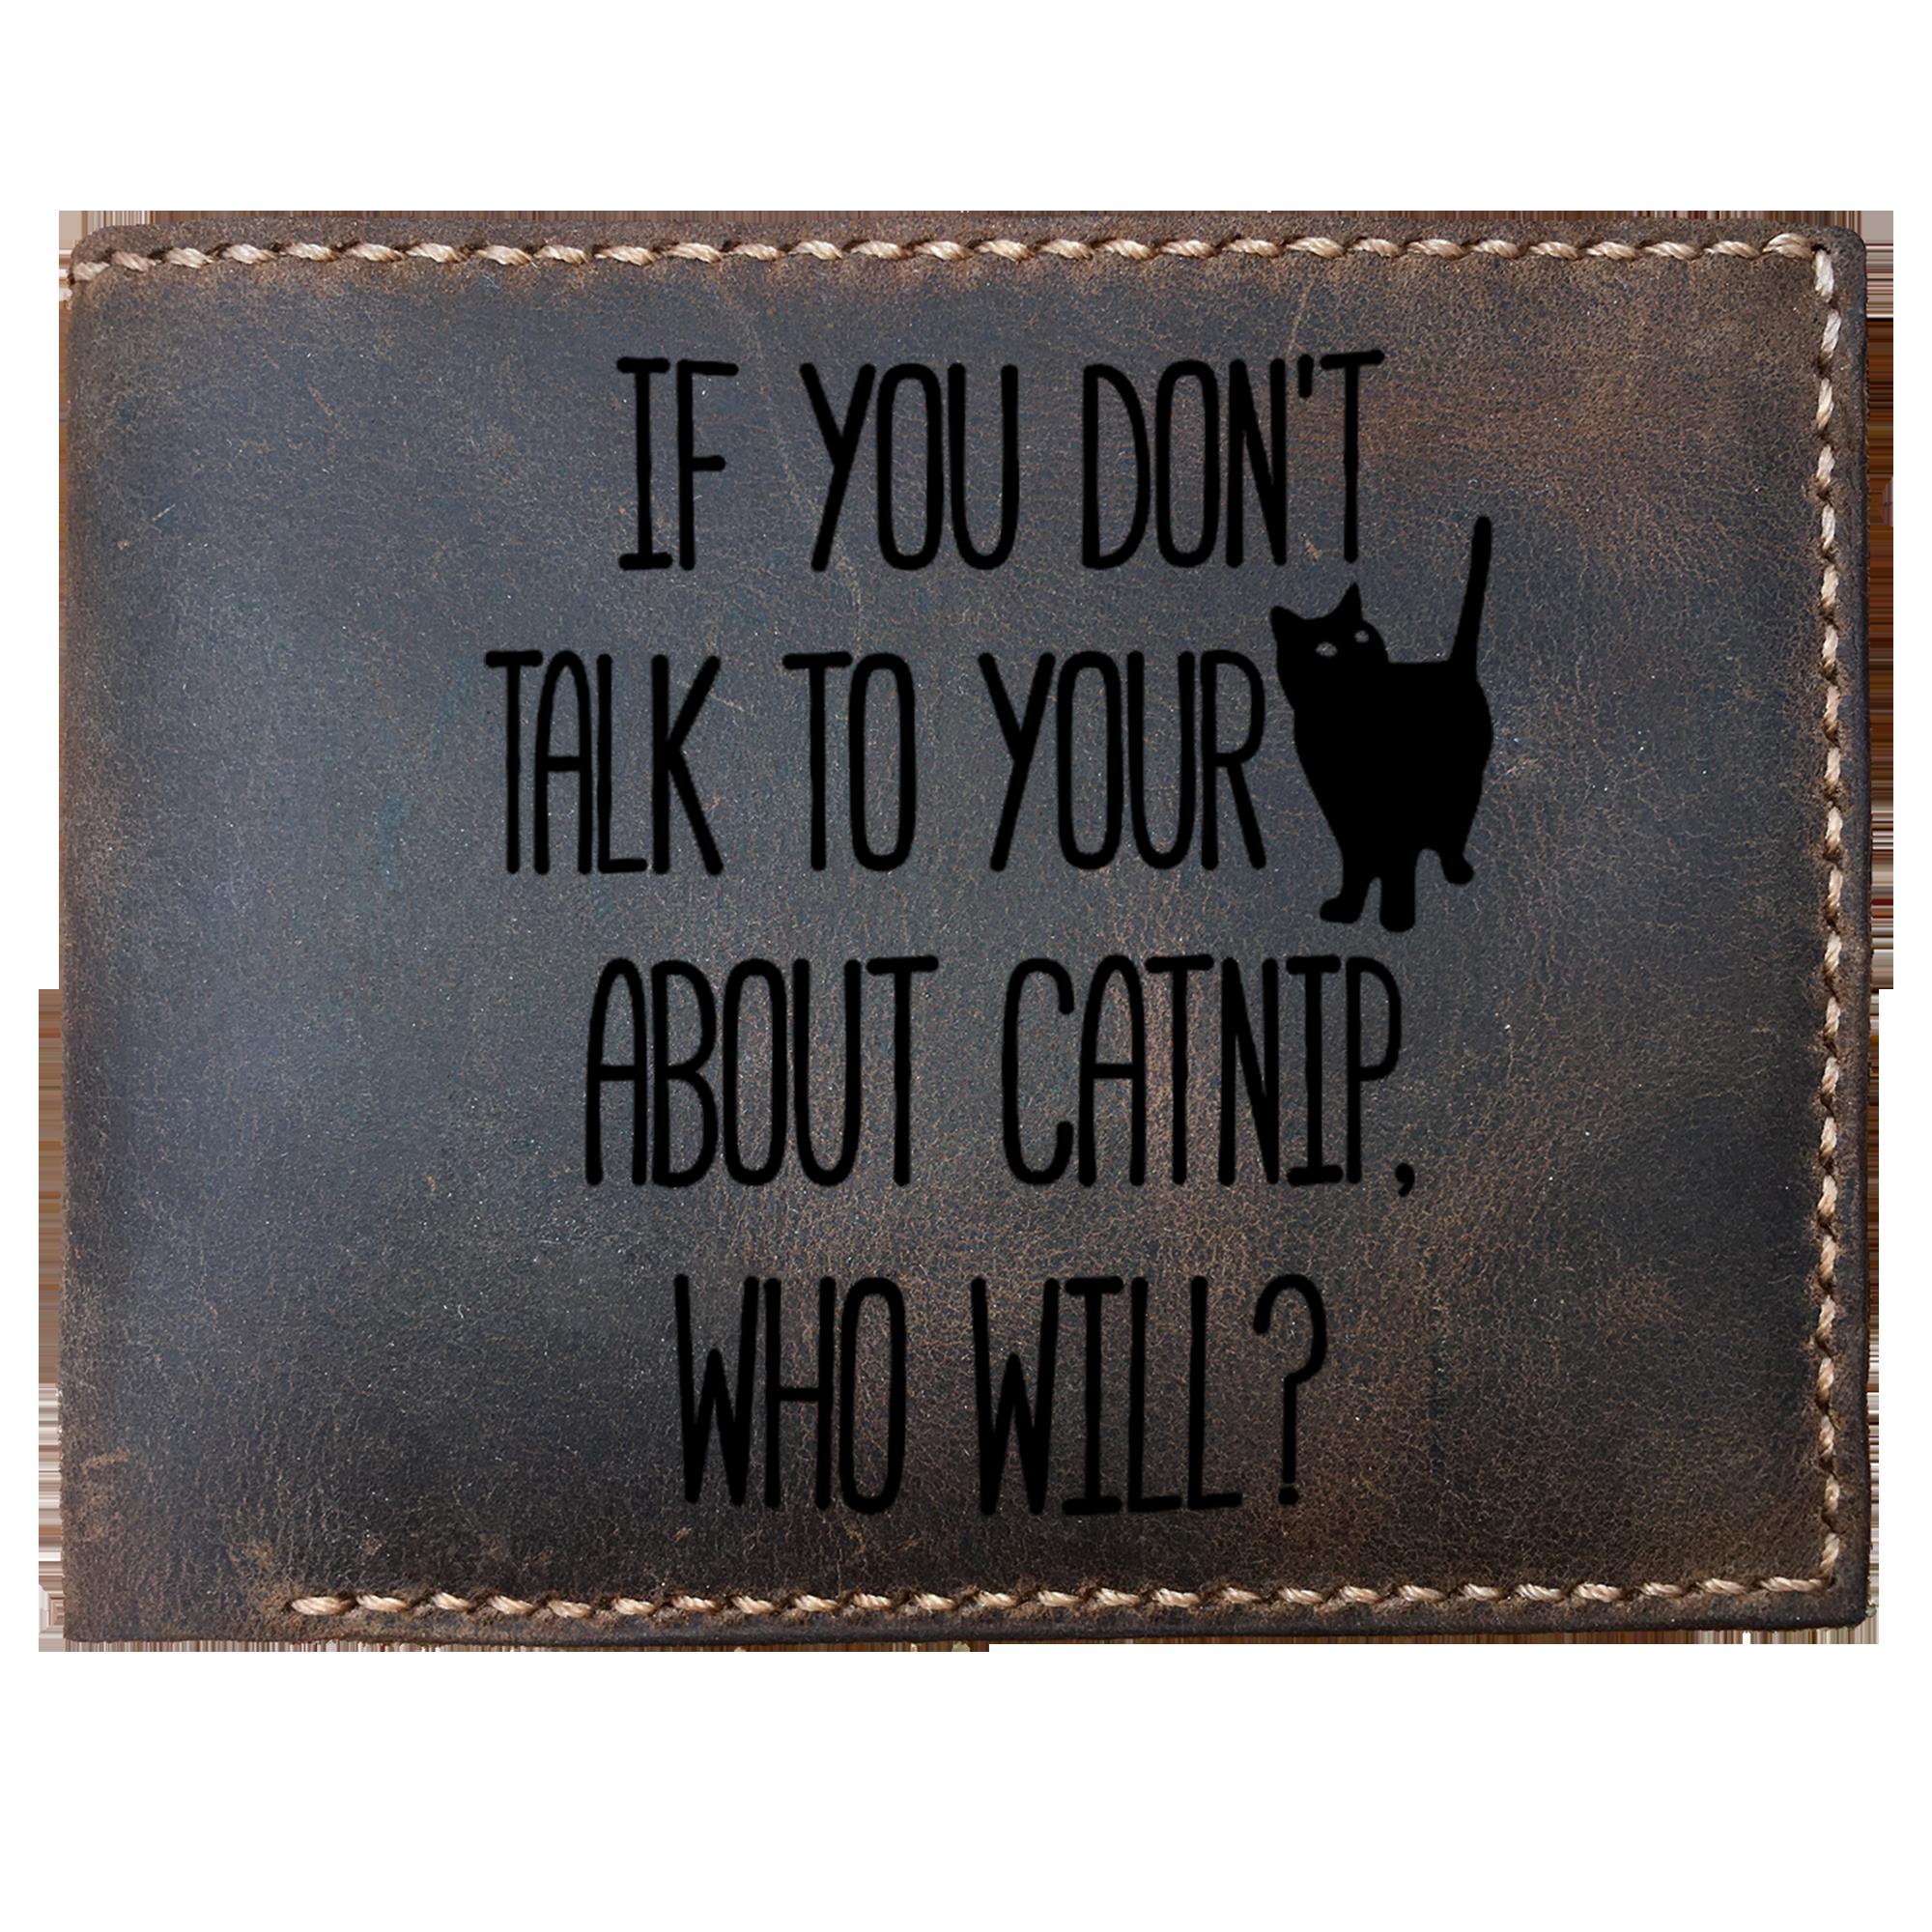 Skitongifts Funny Custom Laser Engraved Bifold Leather Wallet For Men, If You Dont Talk To Your Cat About Catnip